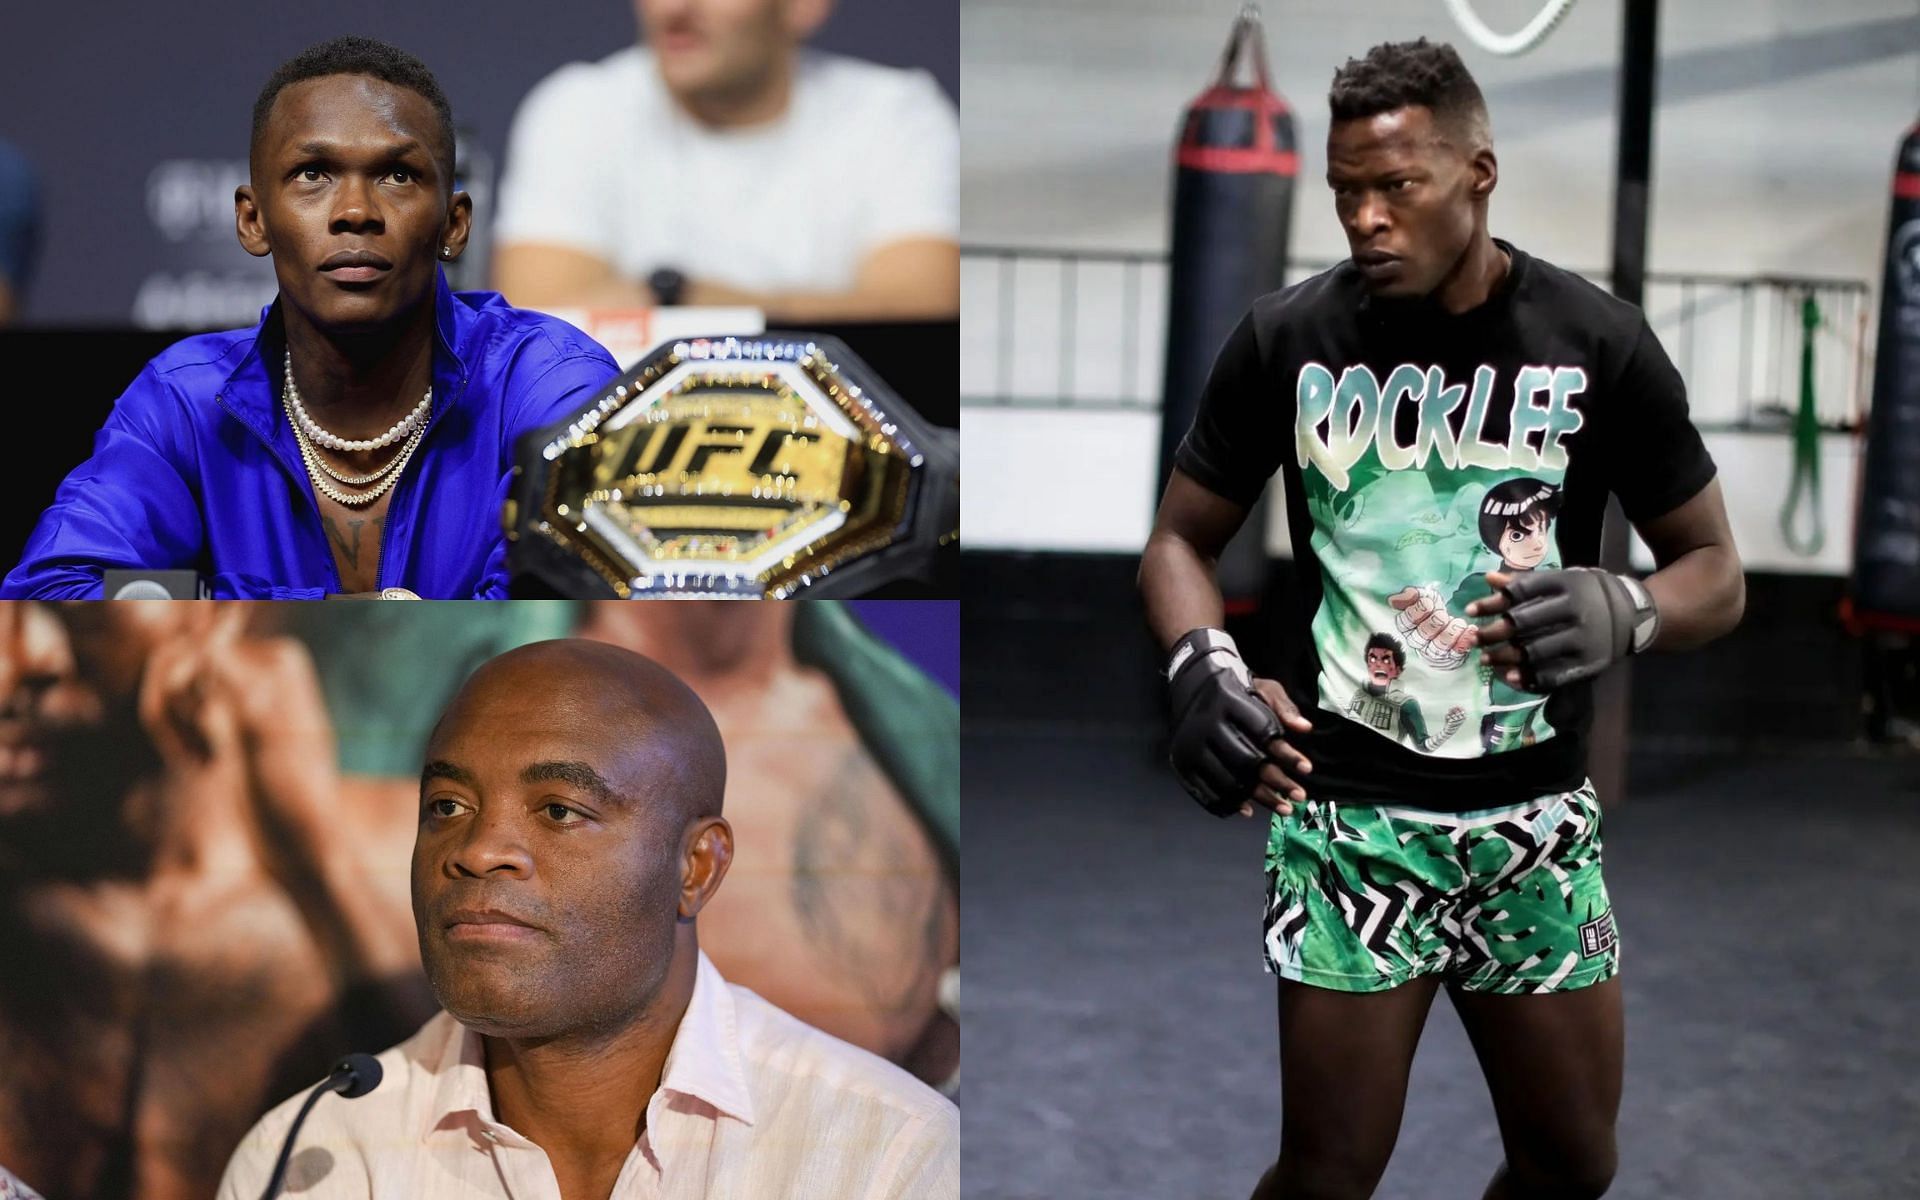 Israel Adesanya (Top Left), Anderson Silva (Bottom Left), Mike Mathetha (Right) (Images courtesy of Getty and blood_diam0nd OInstagram)